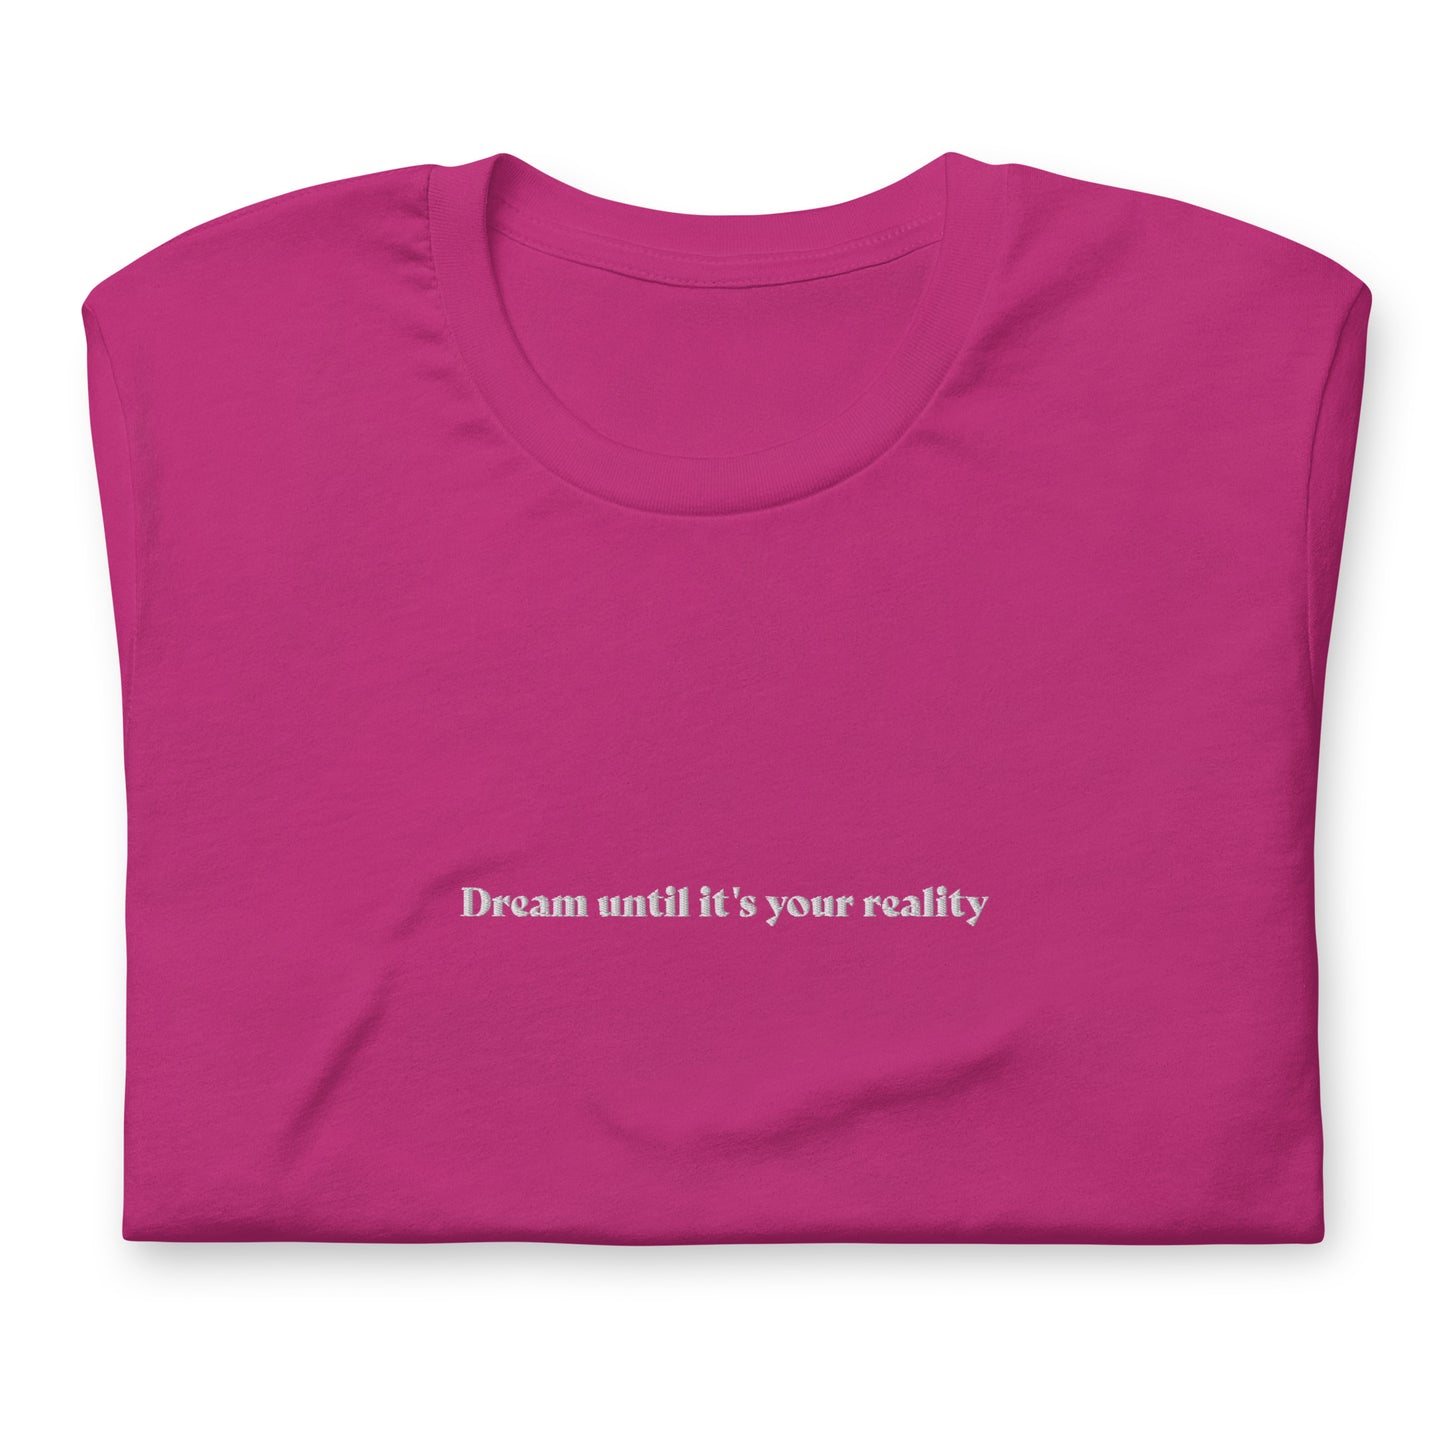 Dream until it's your reality - embroidered T-shirt